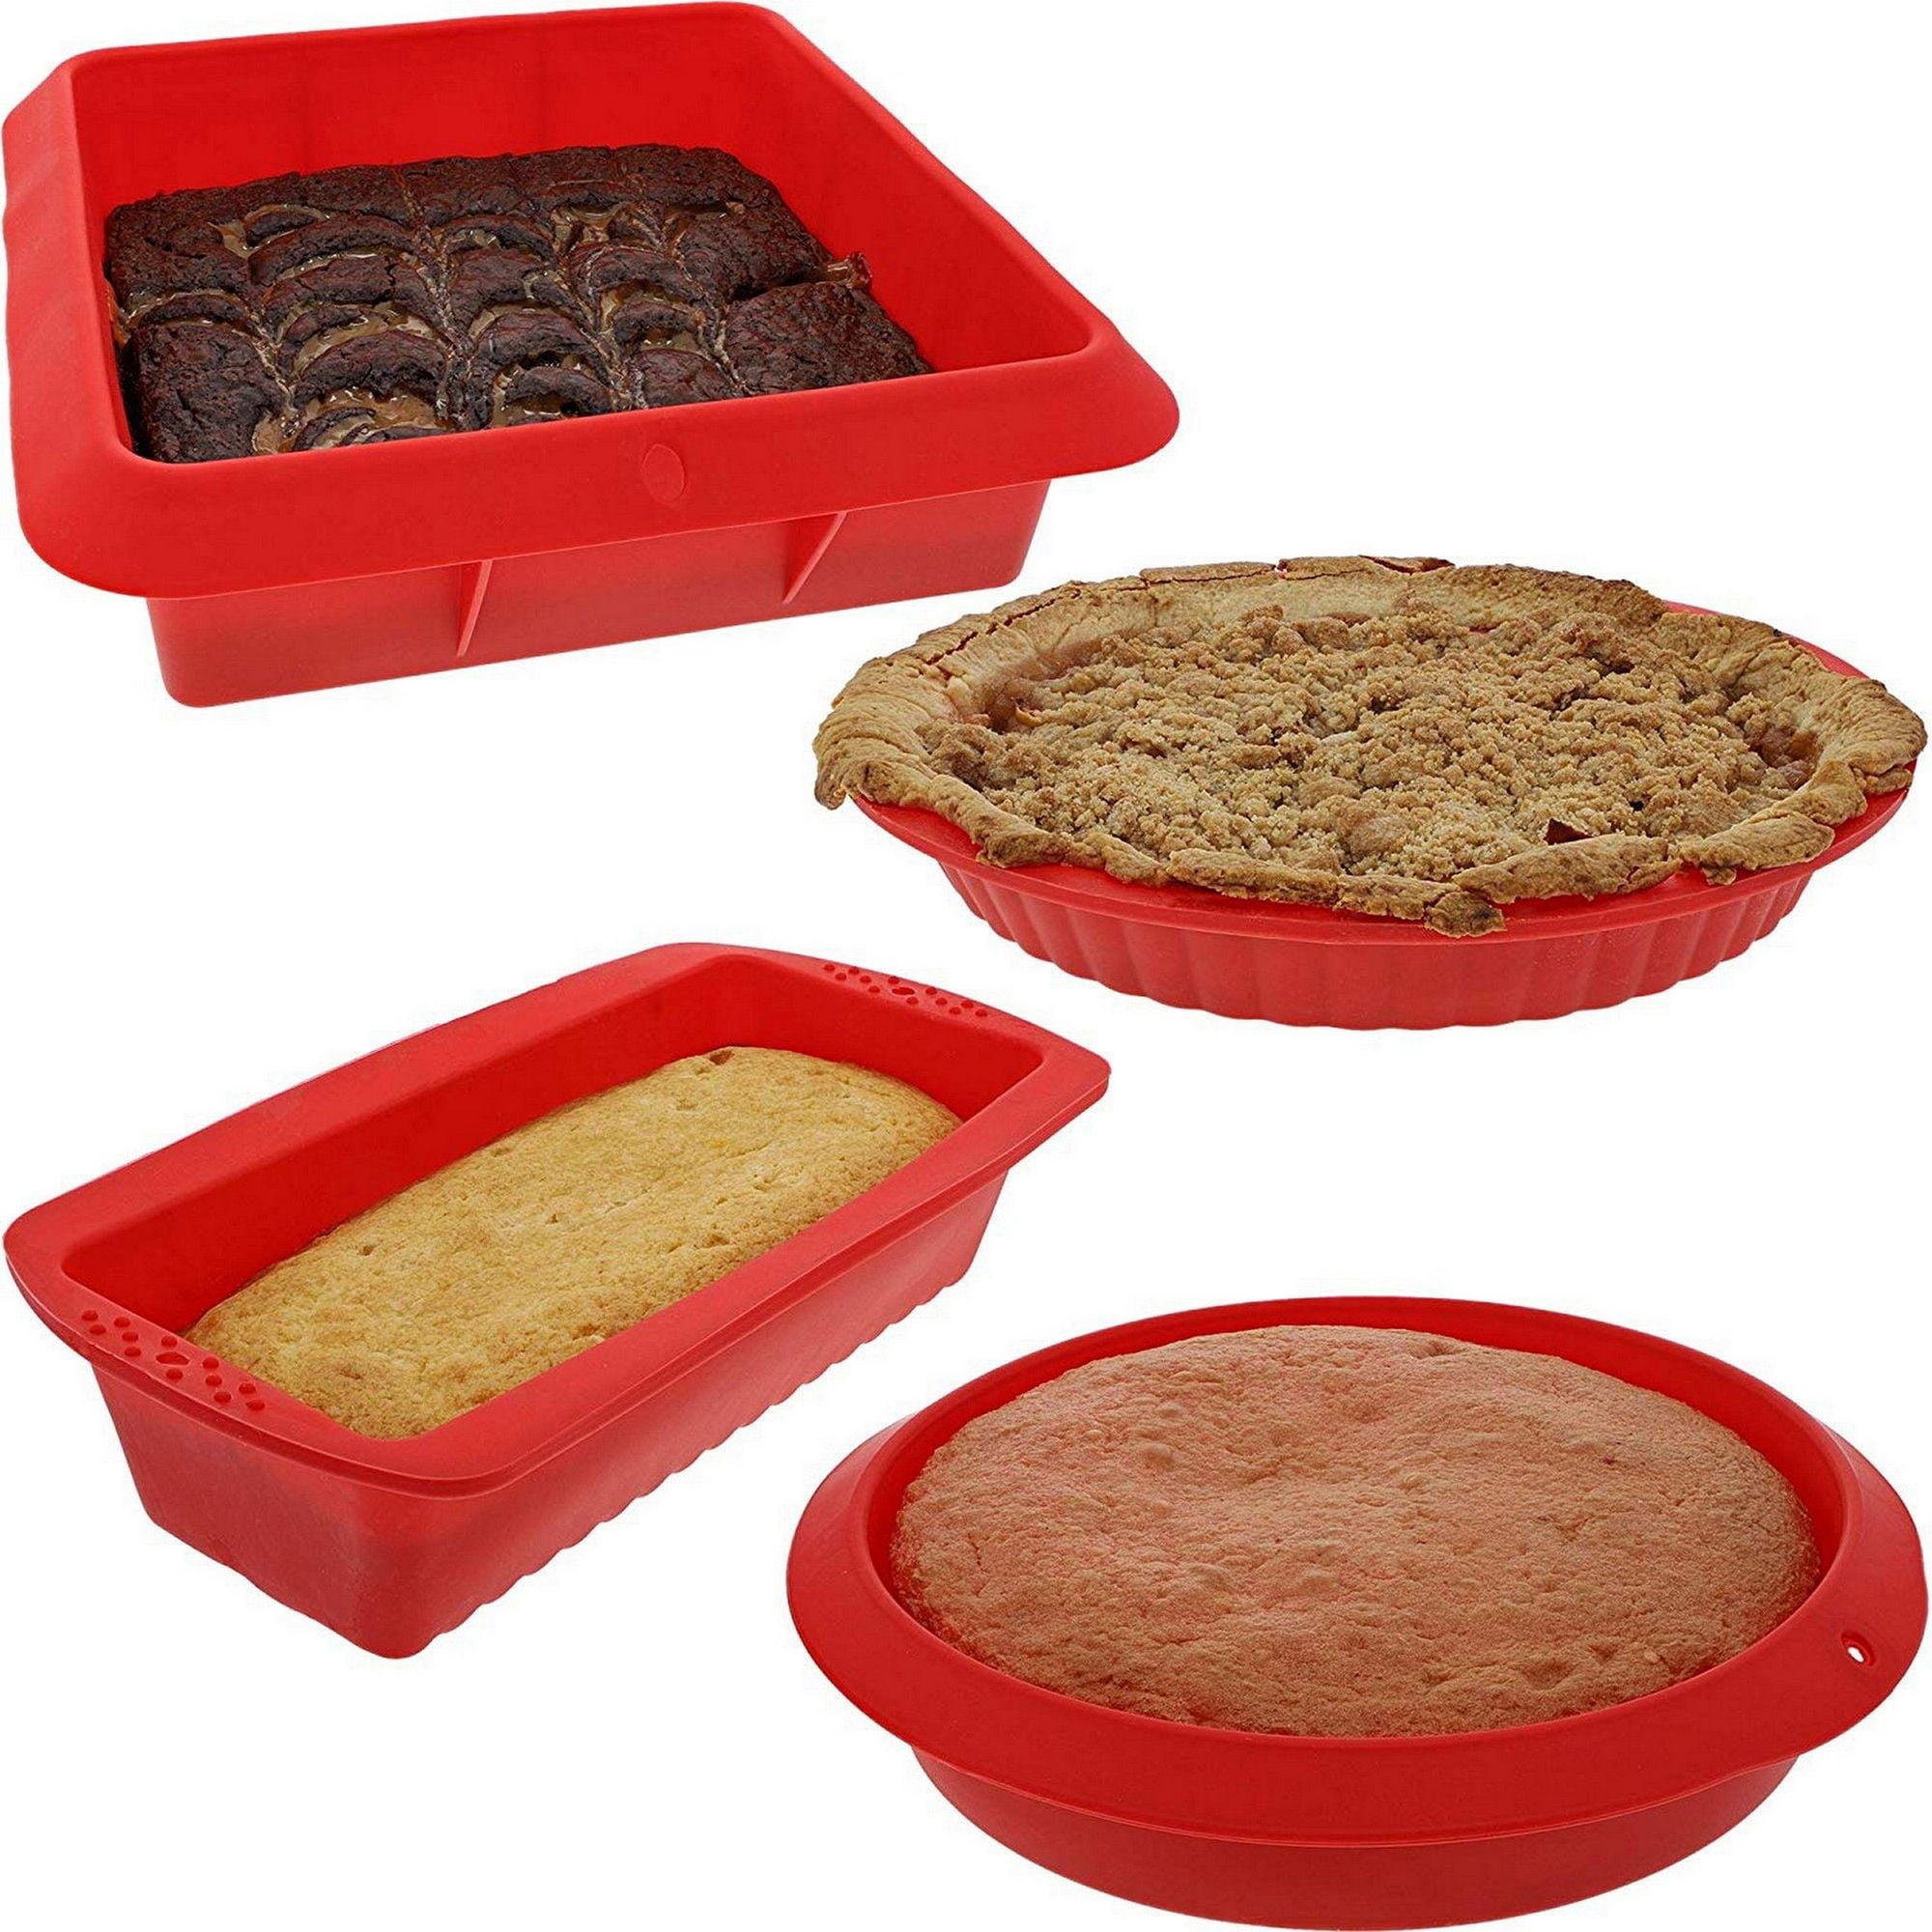 Nonstick Silicone Bakeware Baking Molds Set (4 Piece Set), Red